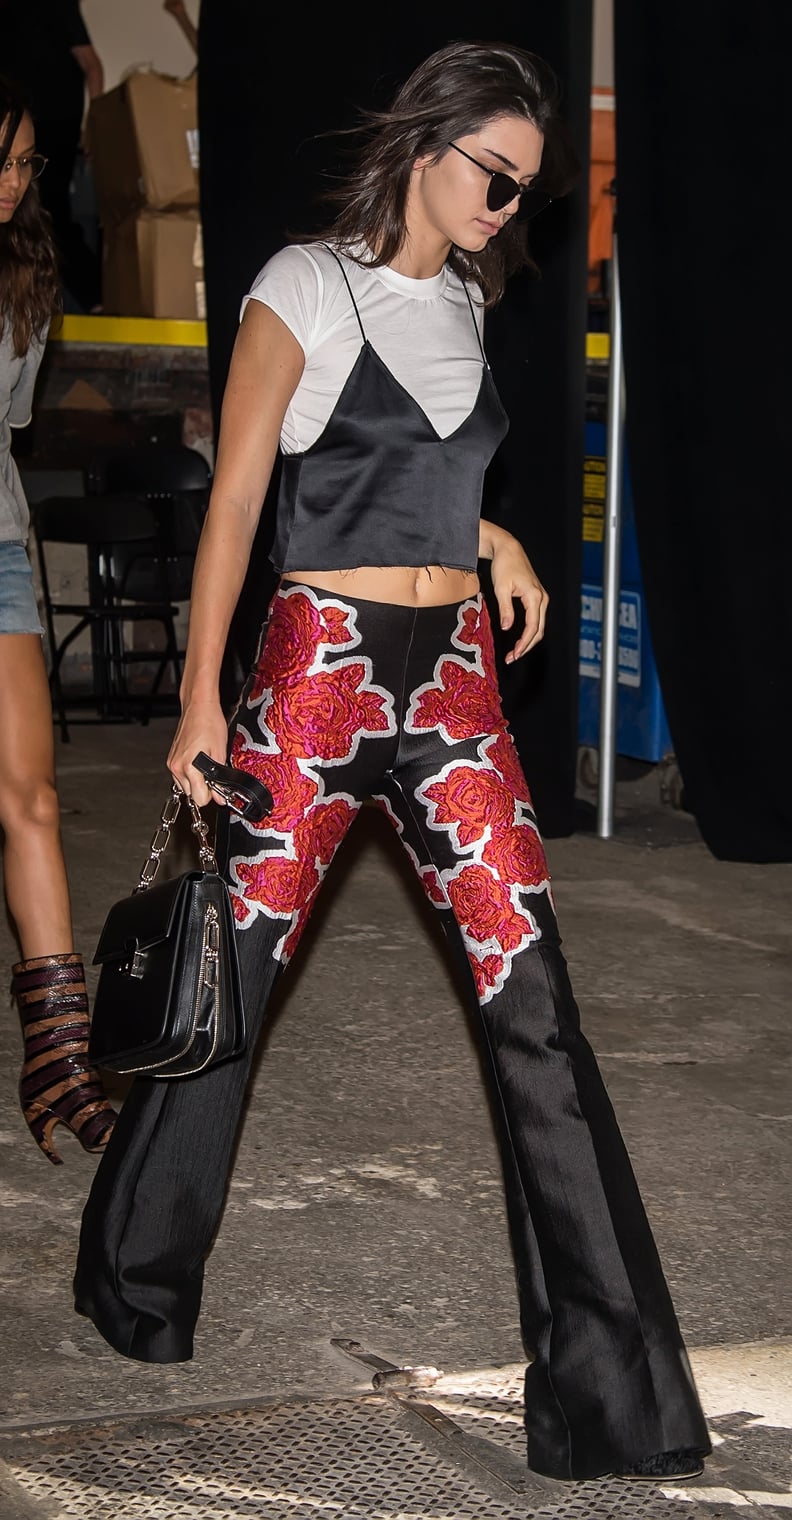 Kendall Jenner Wearing Printed Flares to the Michael Kors Show